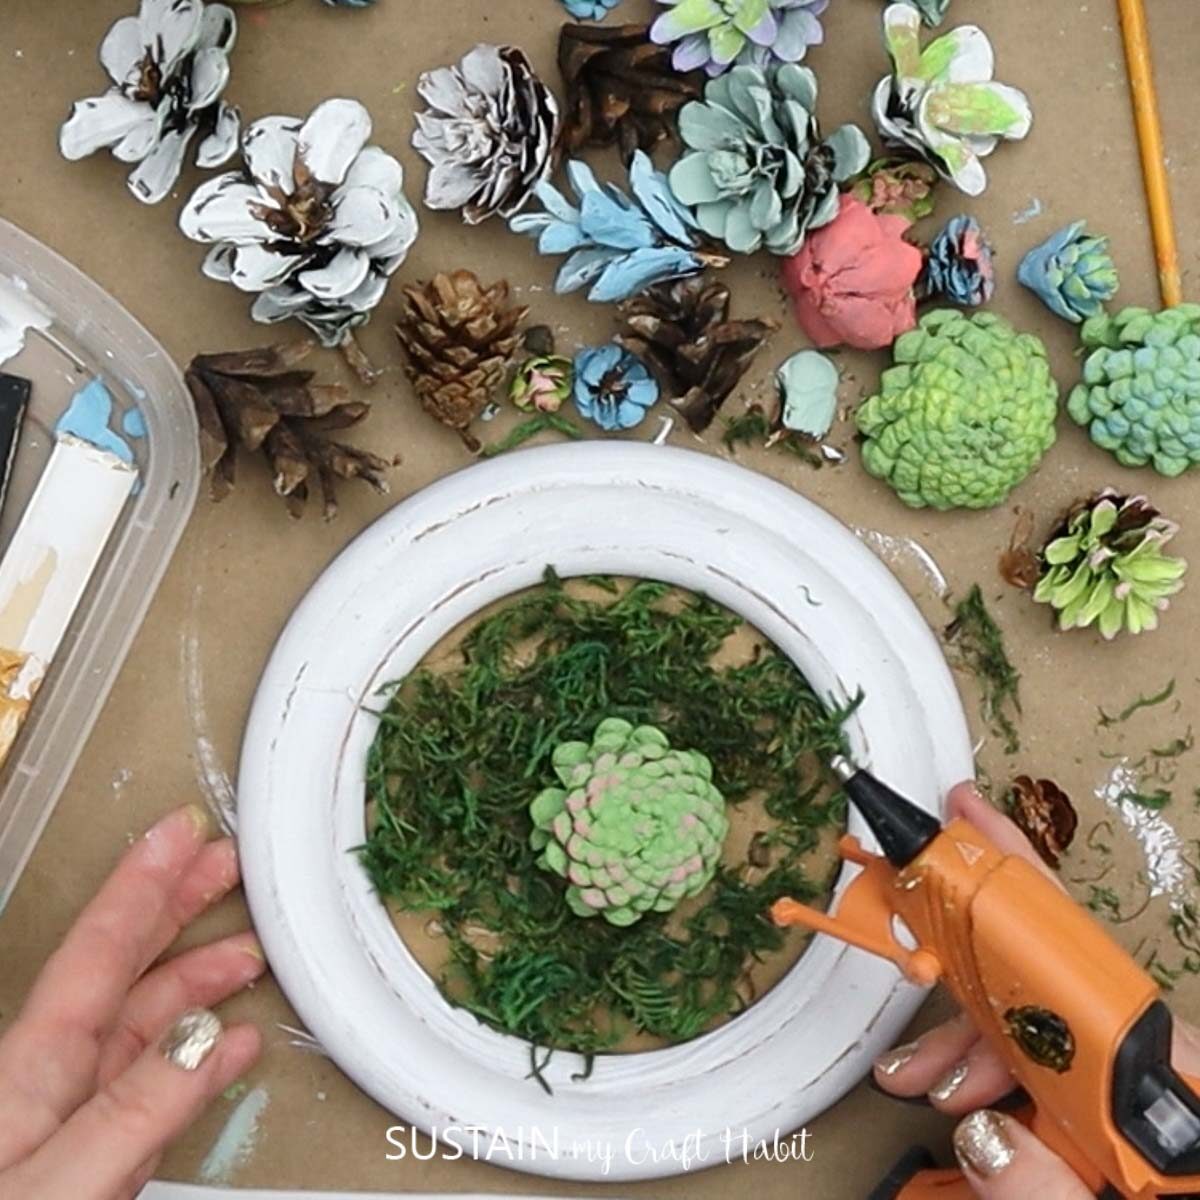 Gluing painted pine cones onto the moss.